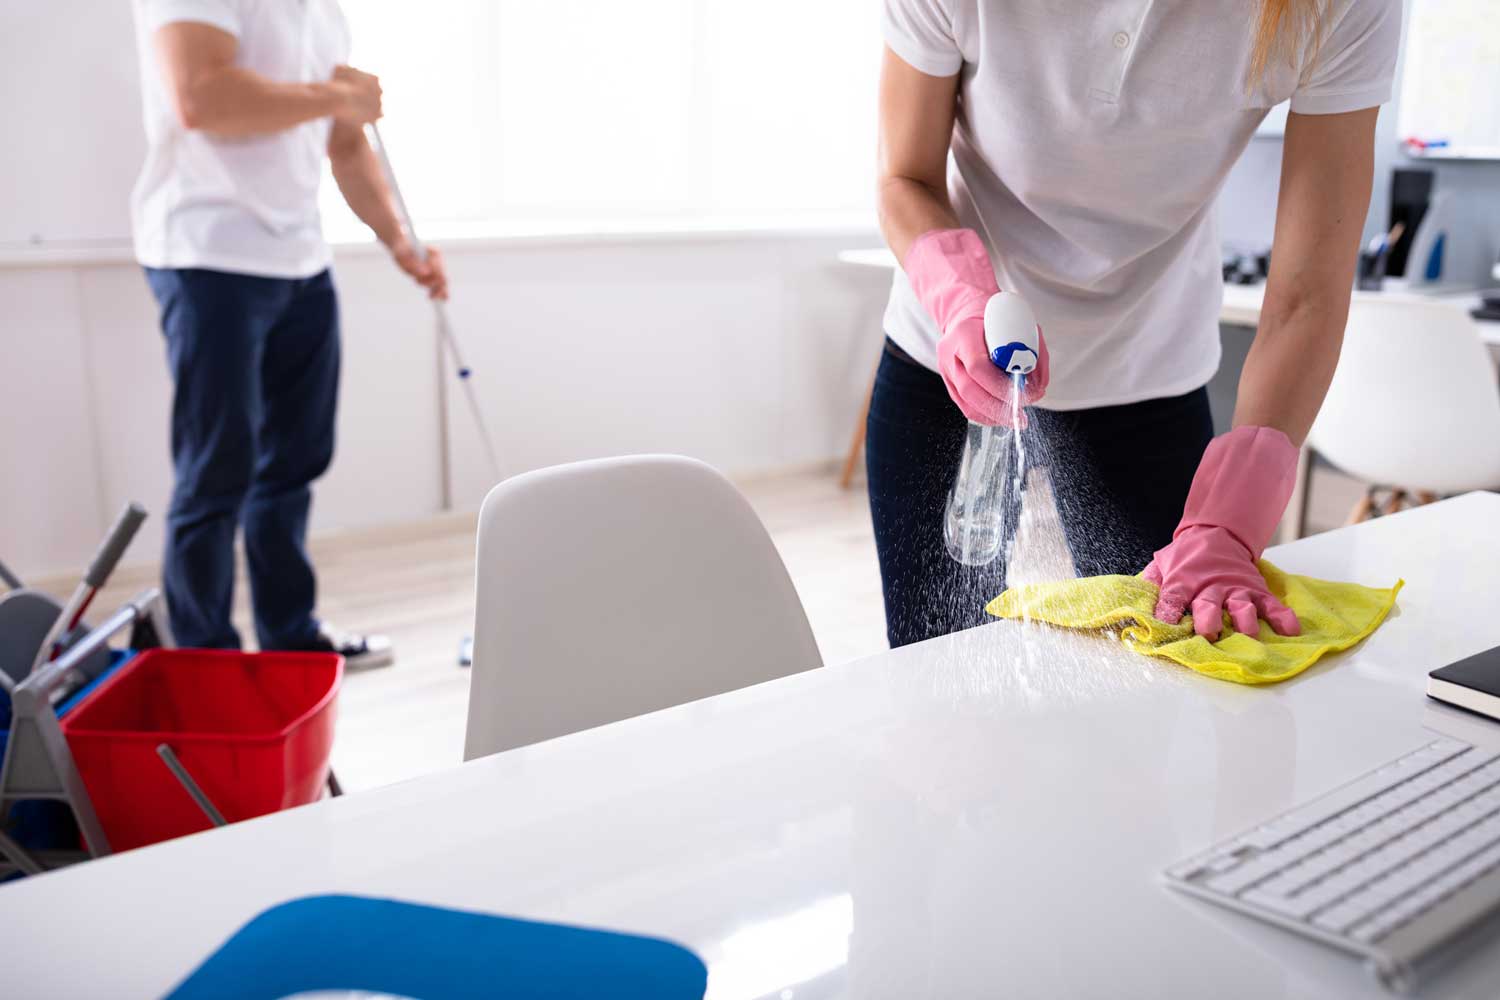 How to Give a Fresh Look to a Place by Using Commercial Office Cleaning Services